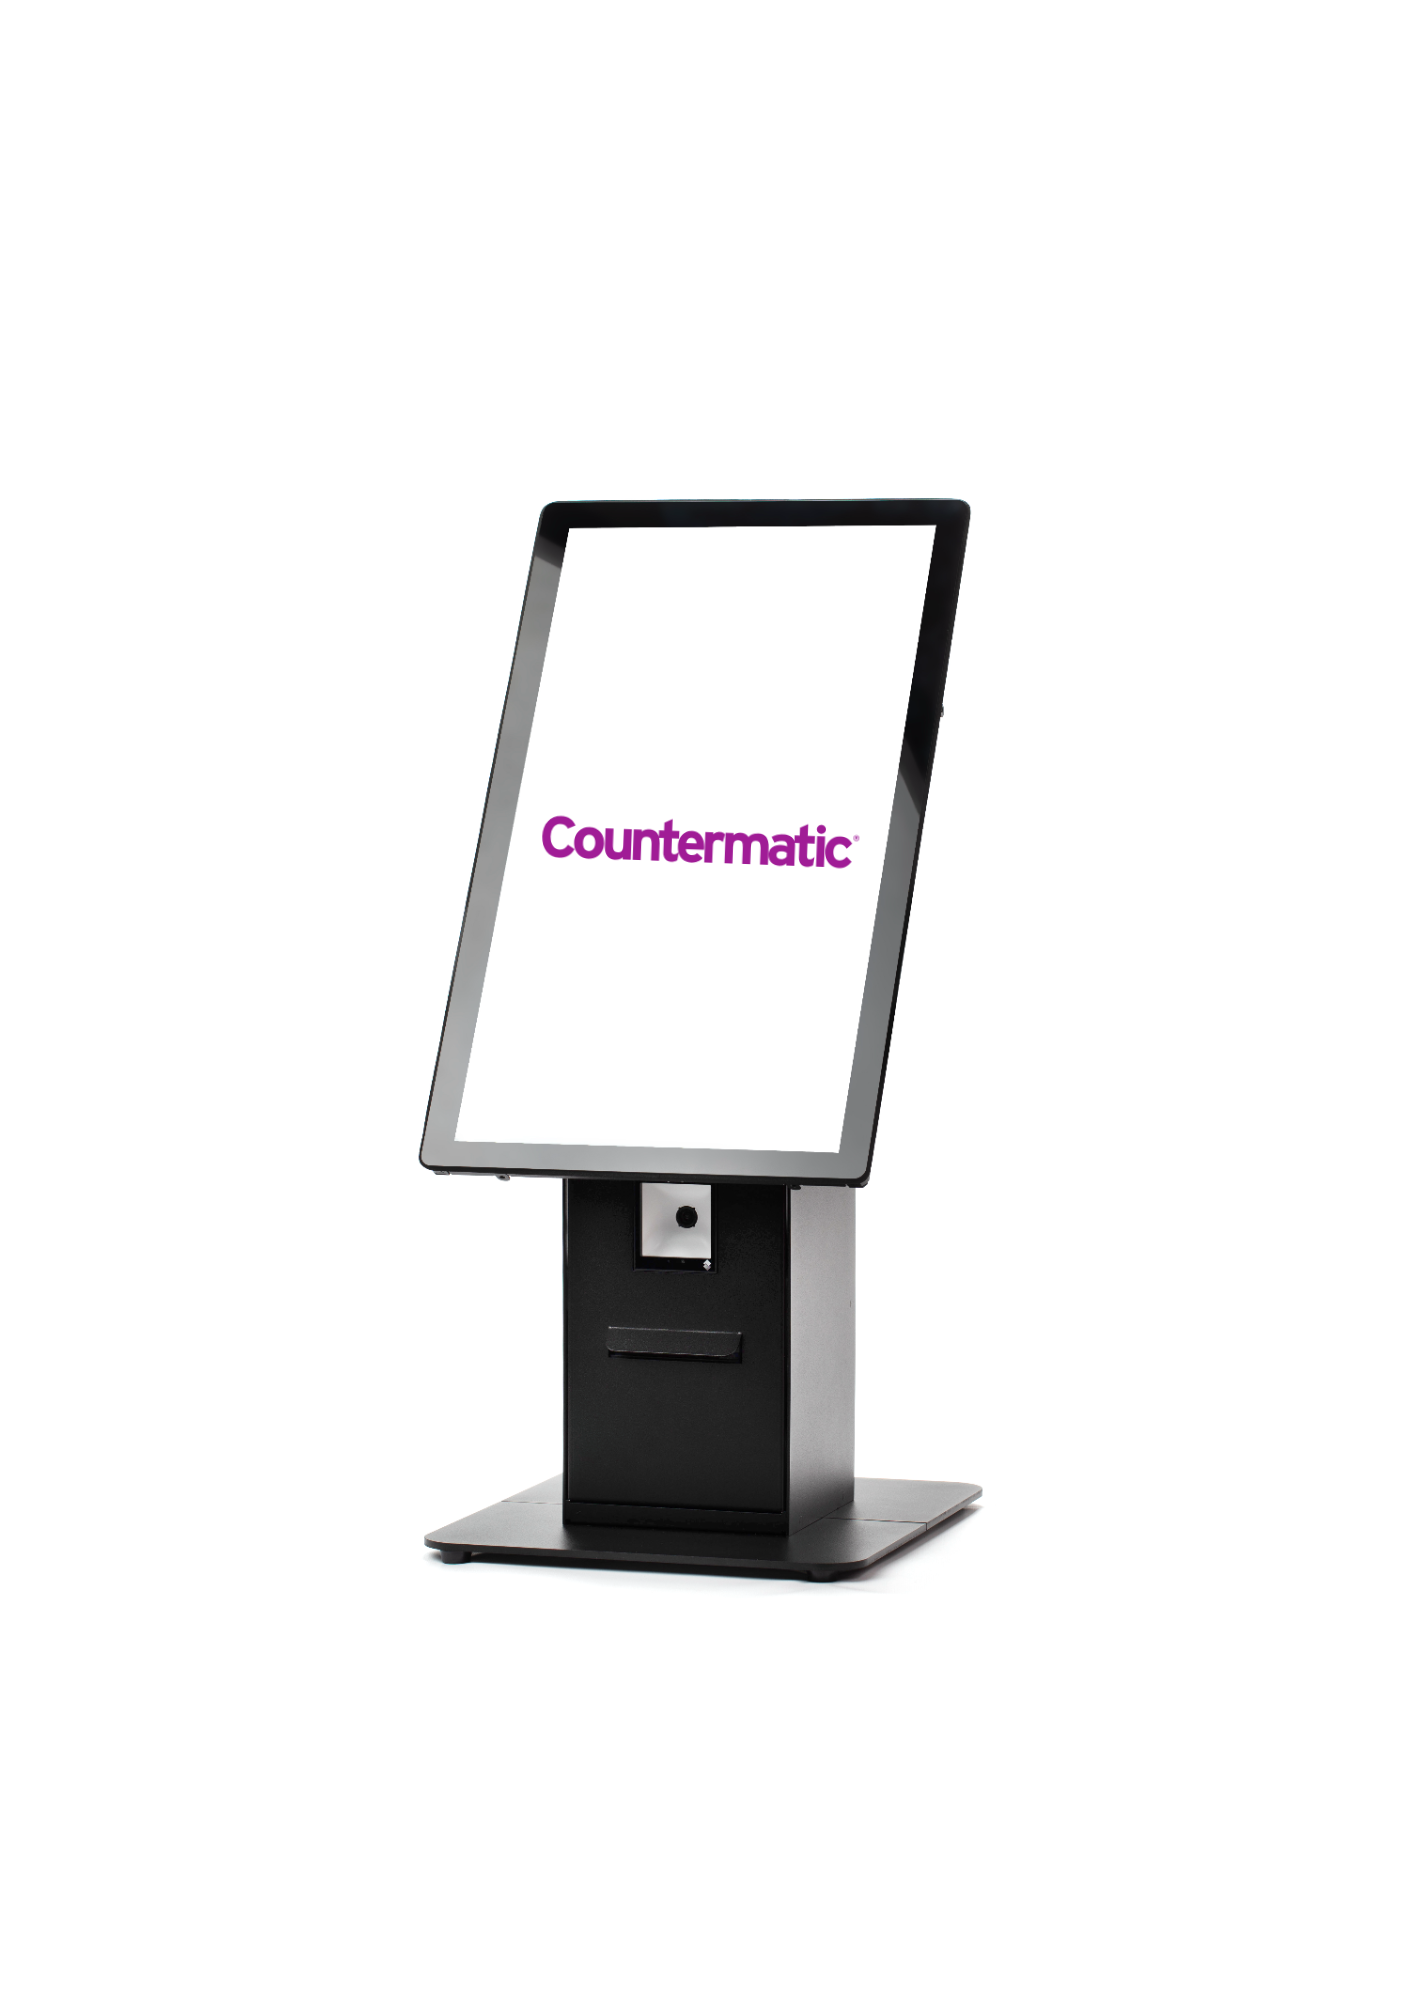 Queue Management and Check-in Kiosk